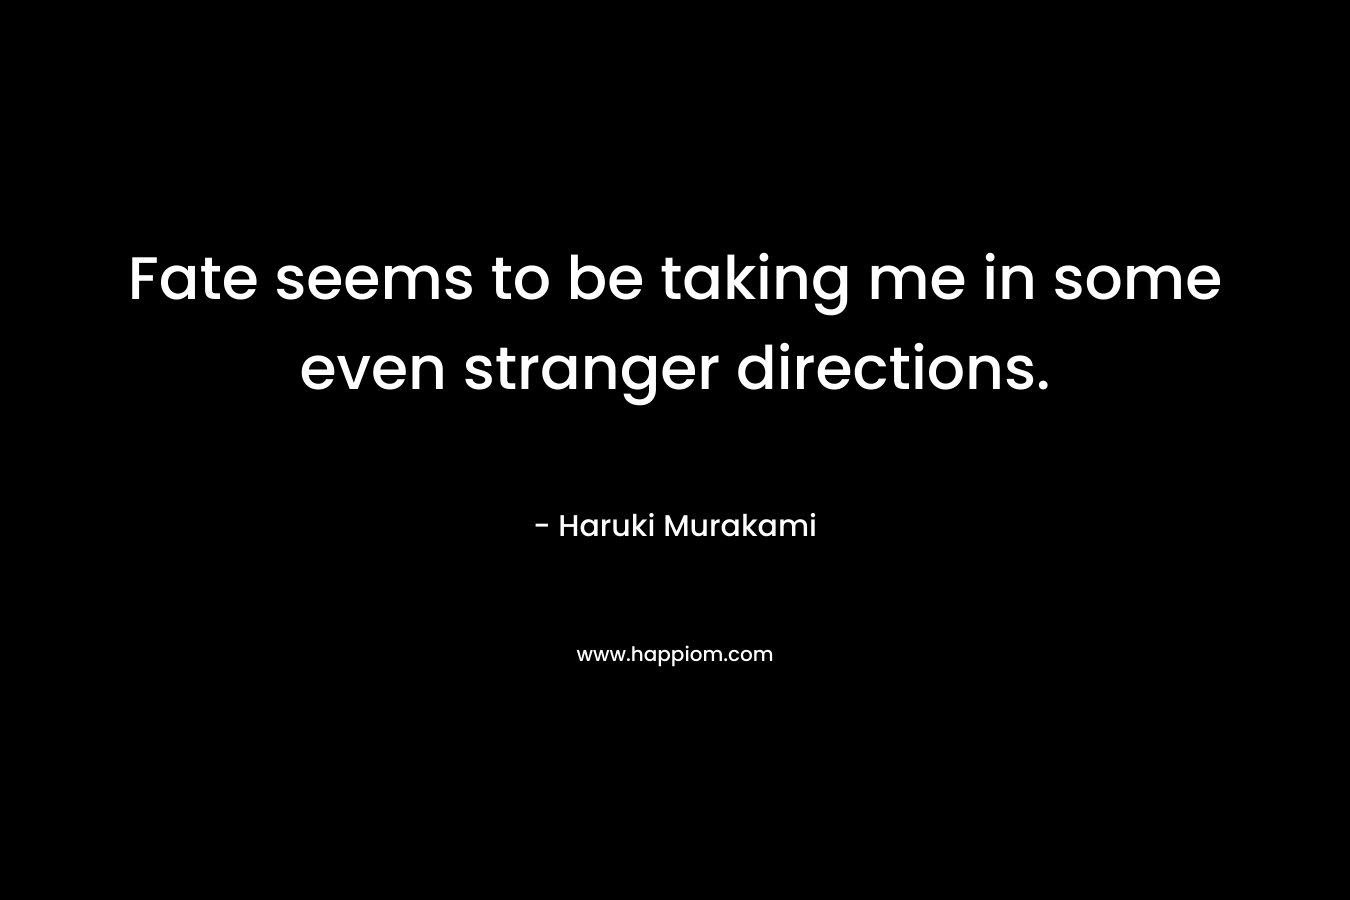 Fate seems to be taking me in some even stranger directions. – Haruki Murakami